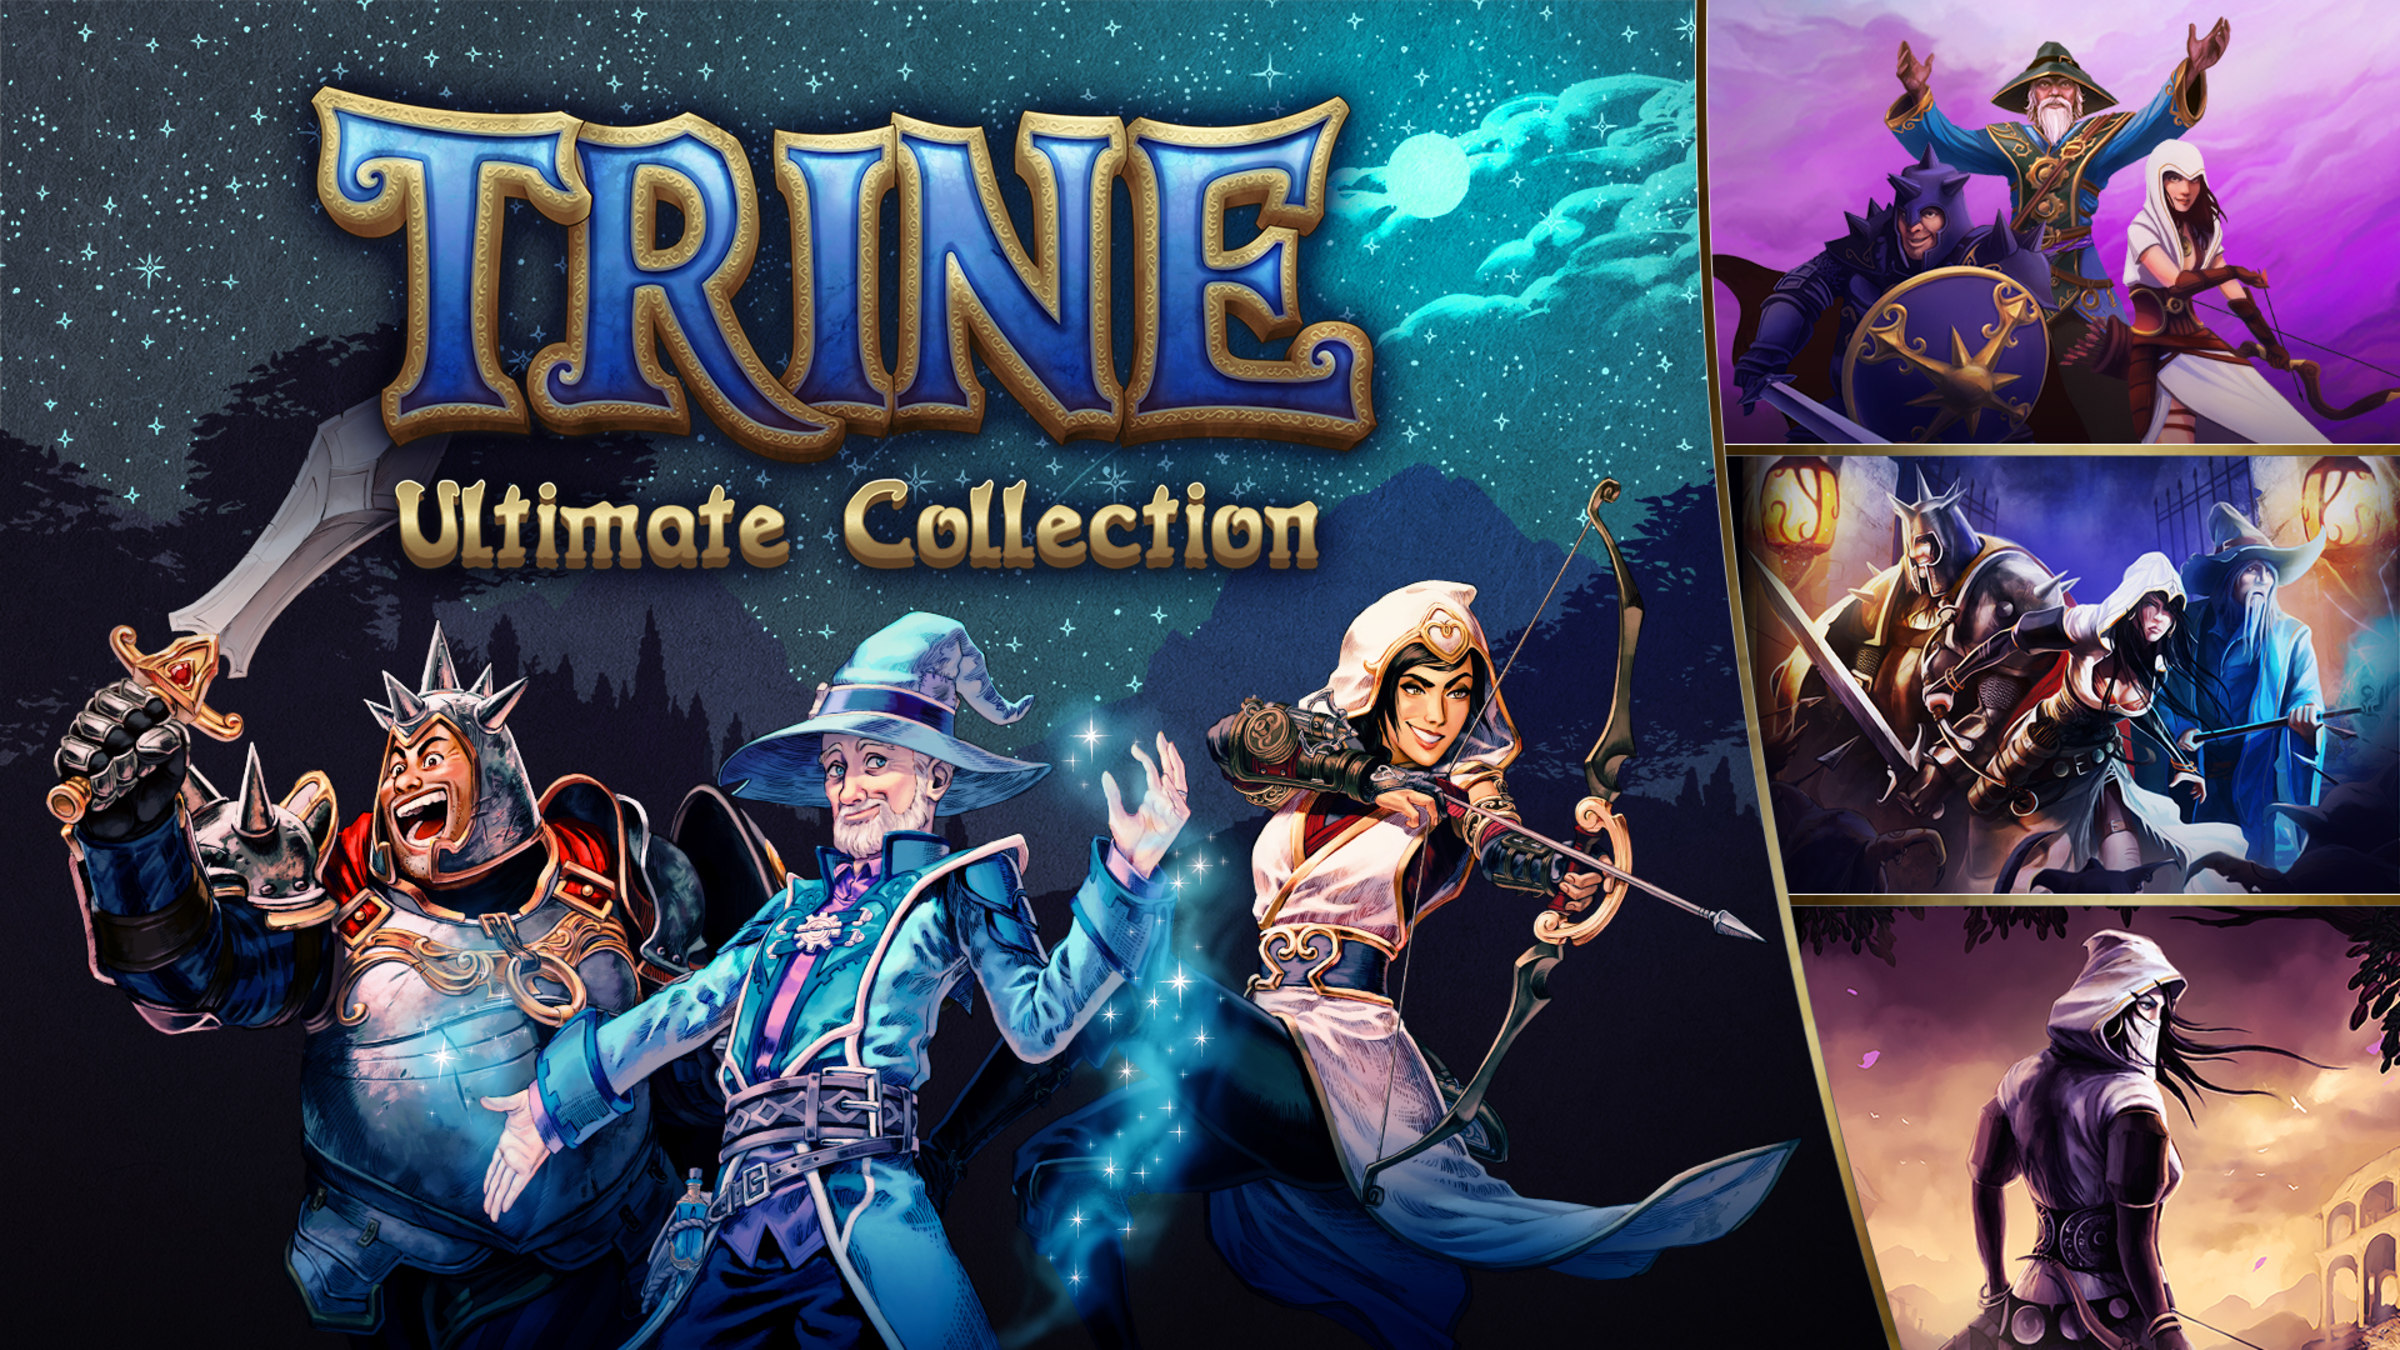 Trine: Ultimate Collection for Nintendo Switch - Nintendo Official Site